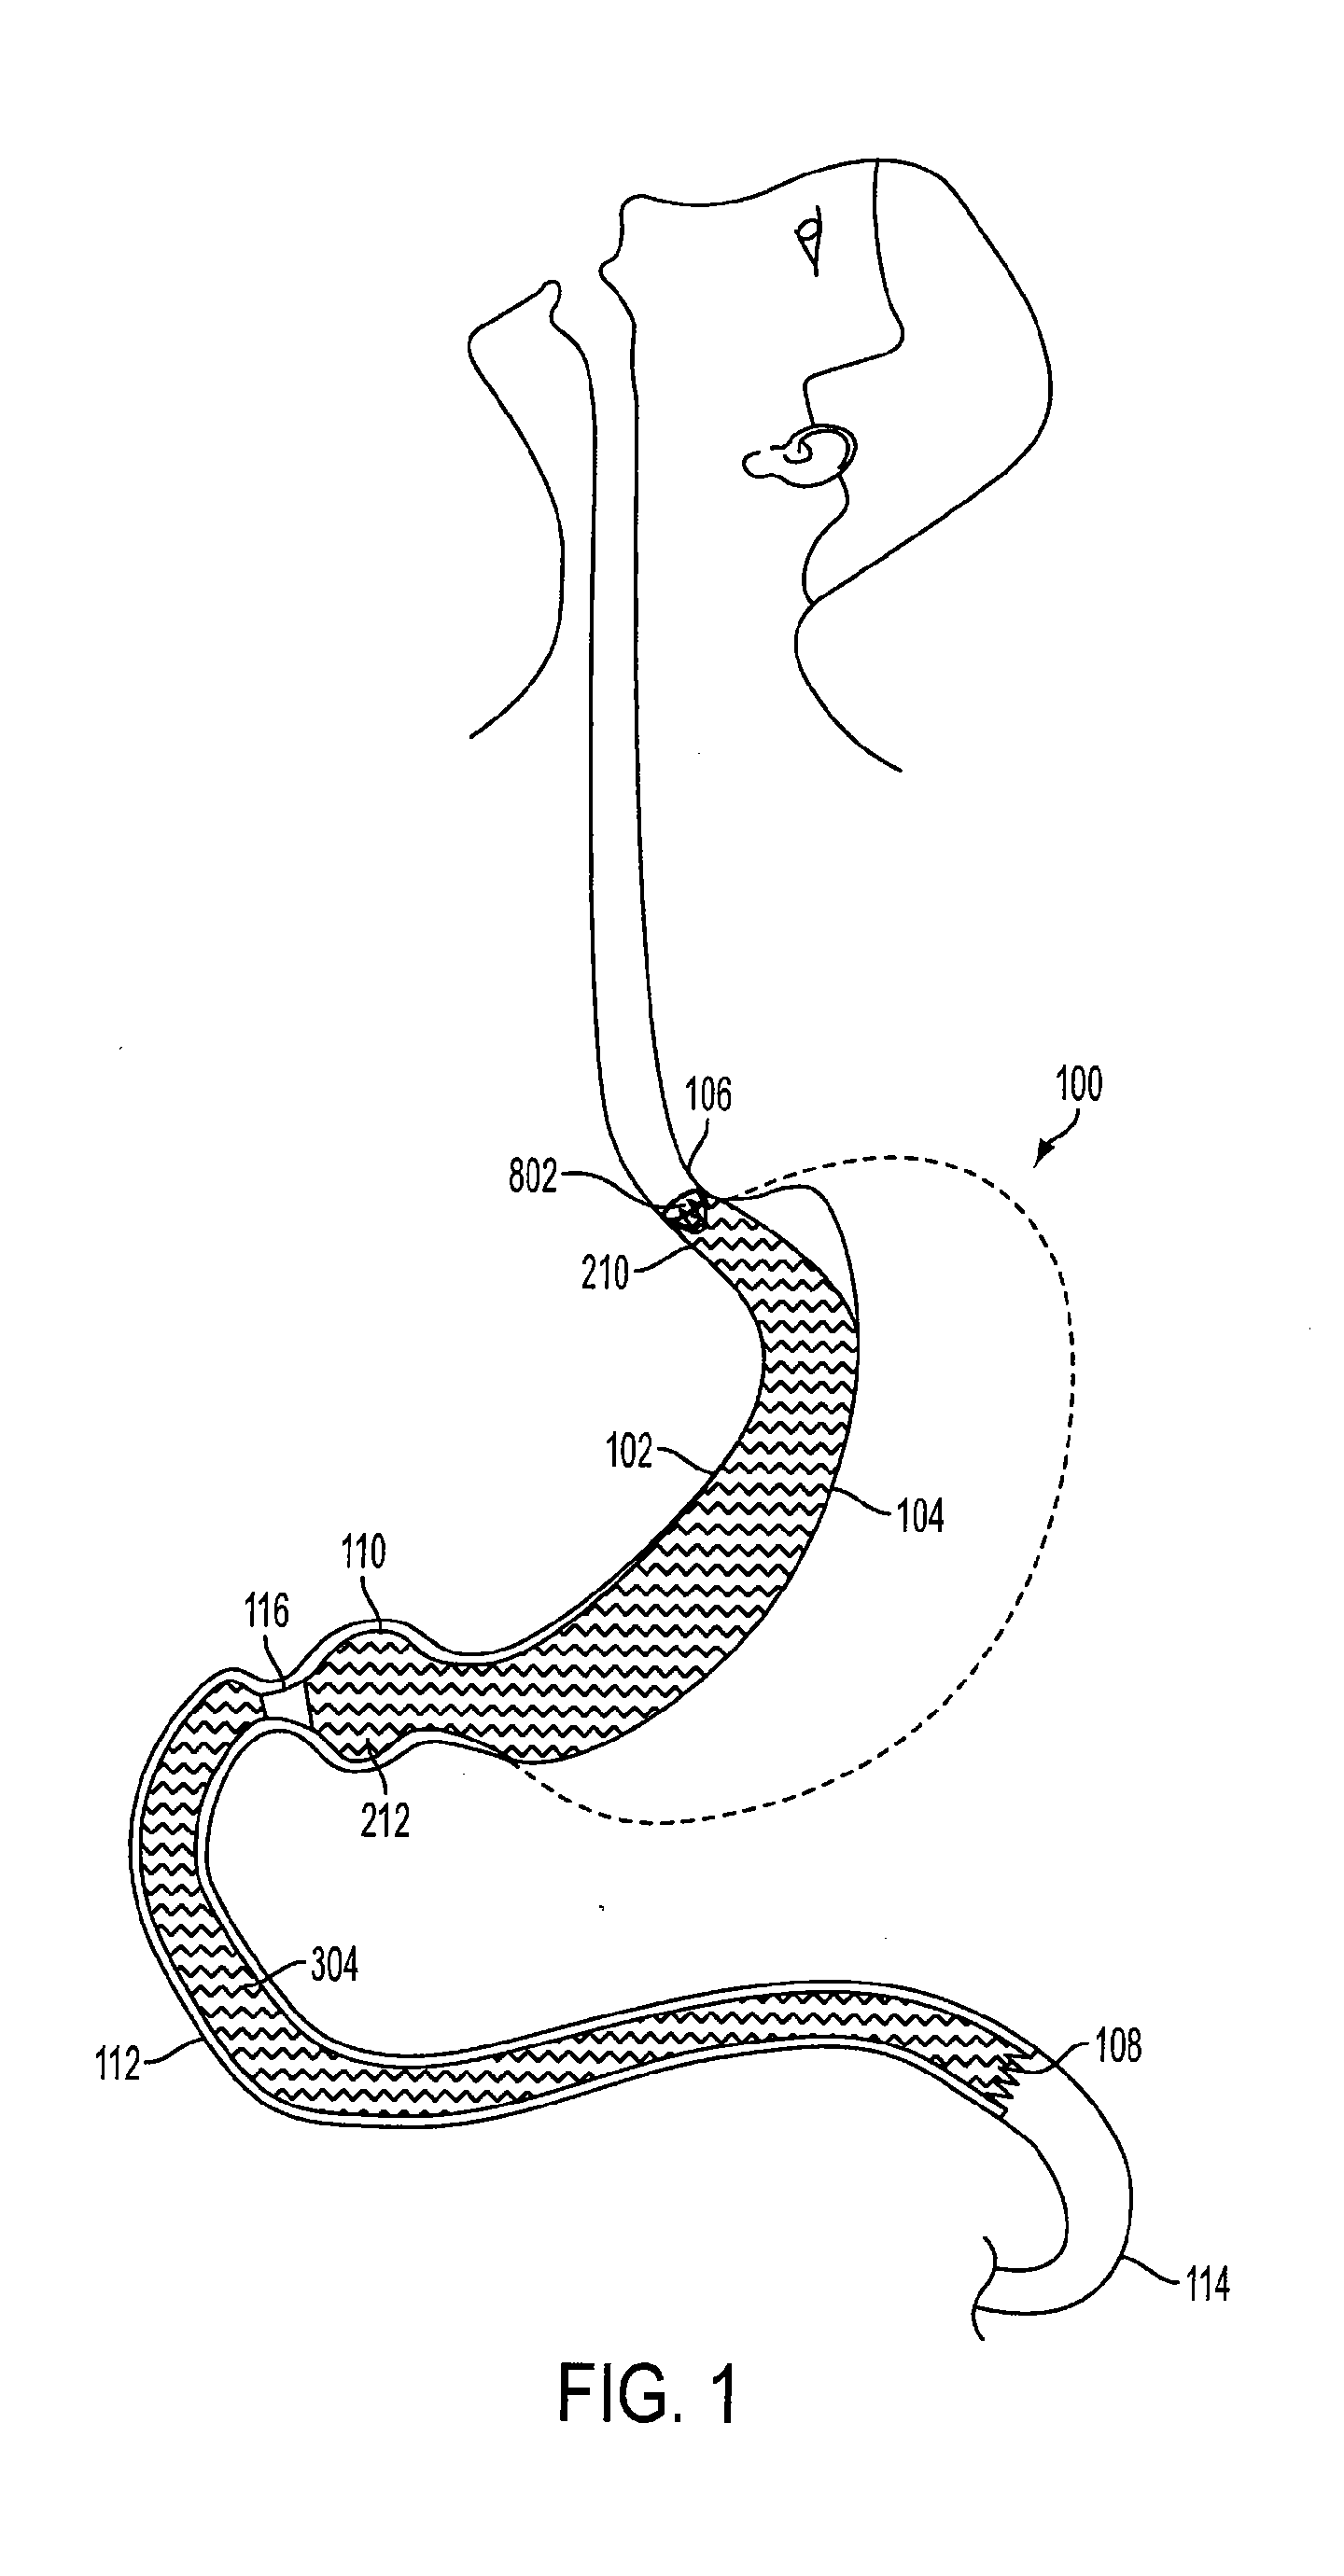 Method and apparatus for treating obesity and controlling weight gain and absorption of glucose in mammals